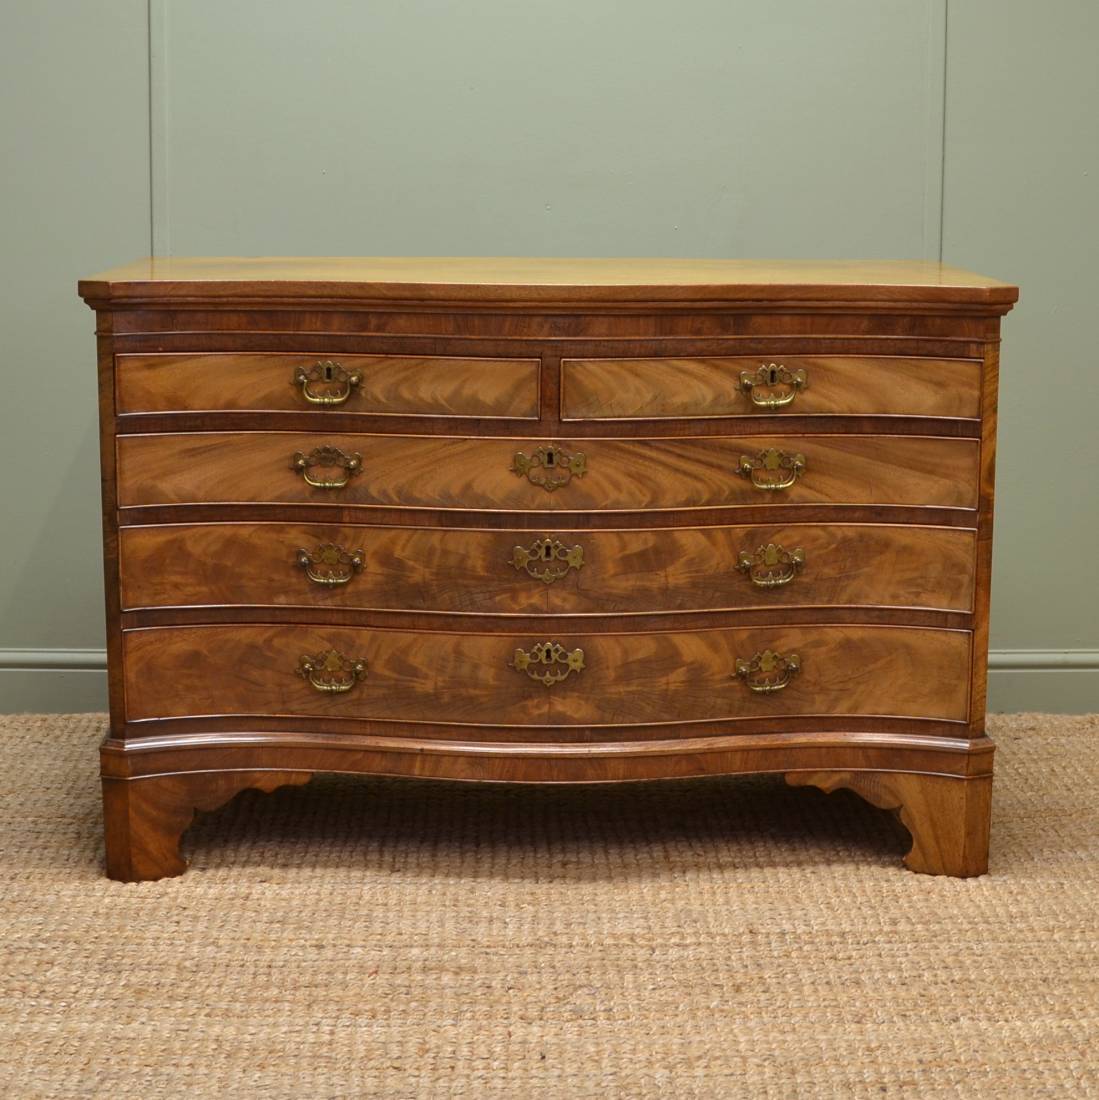 Spectacular Mellow Mahogany Serpentine Edwardian Antique Chest Of Drawers